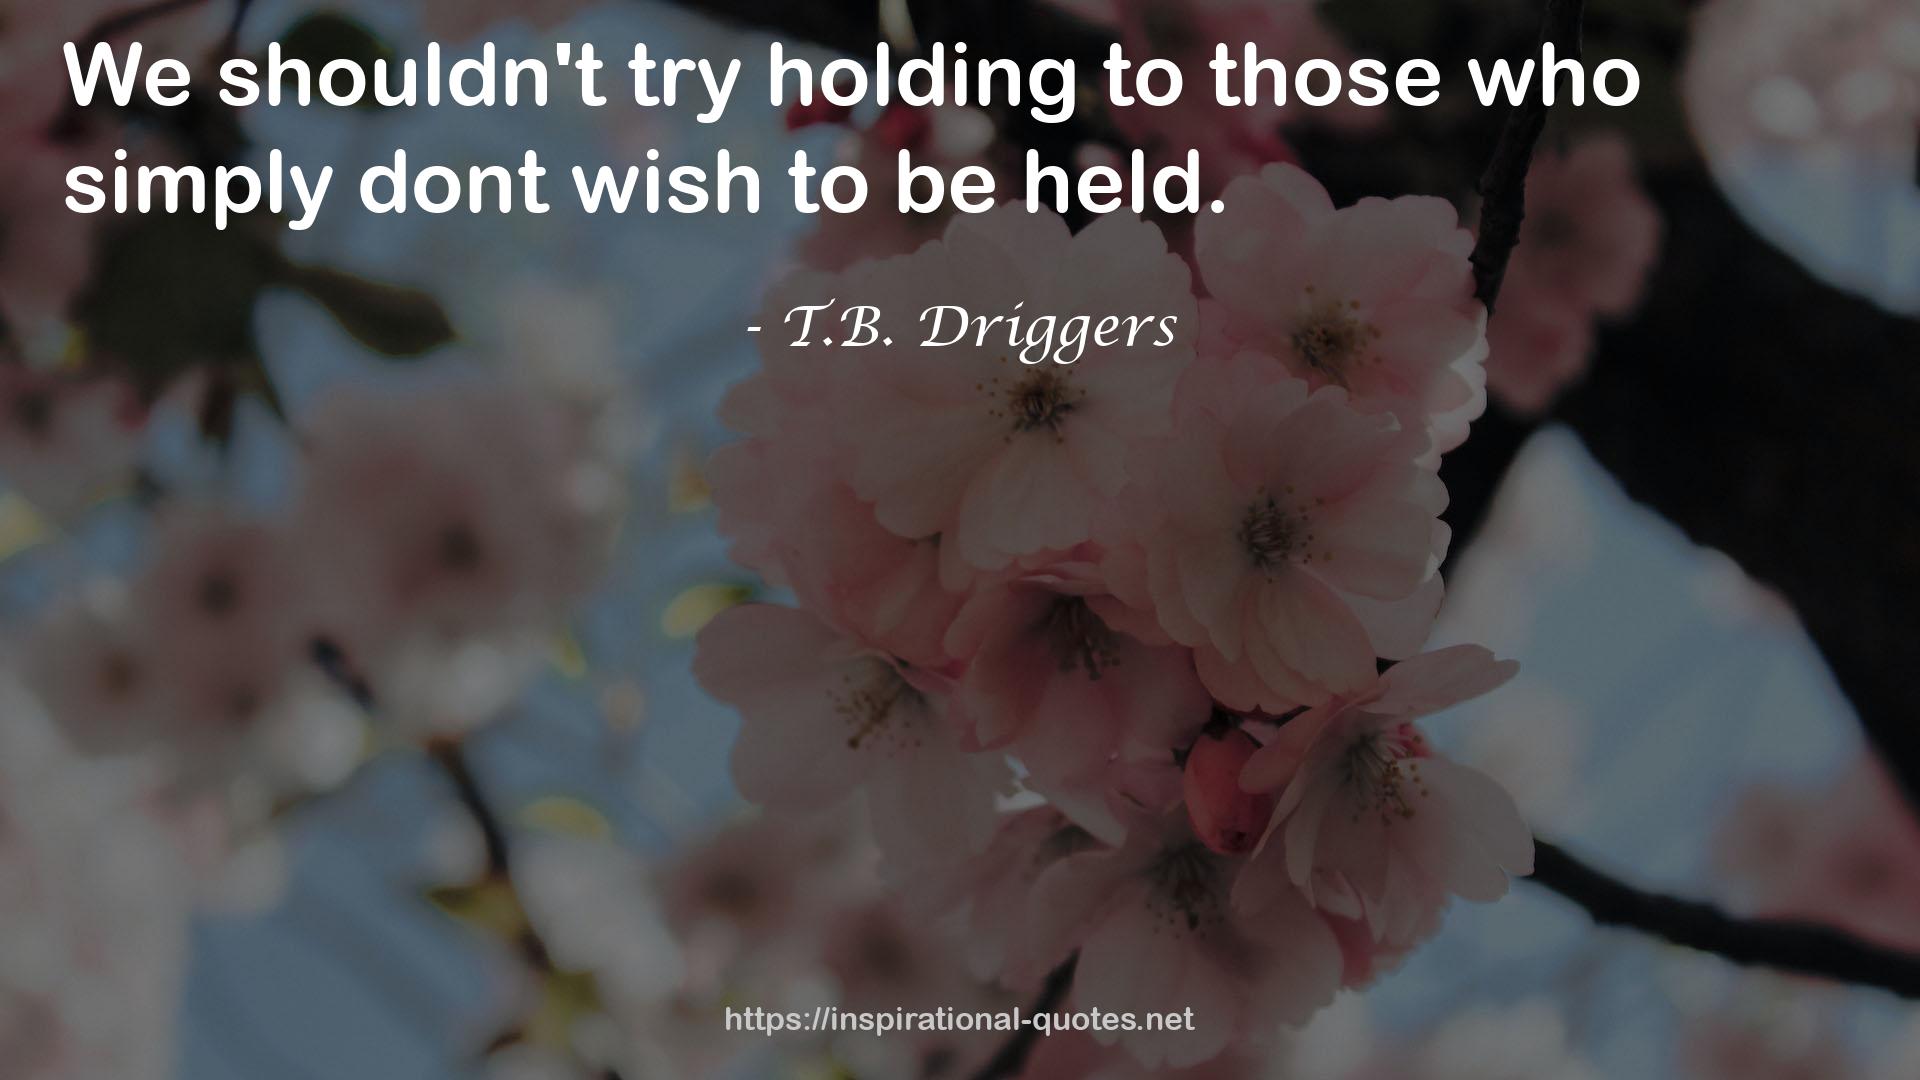 T.B. Driggers QUOTES